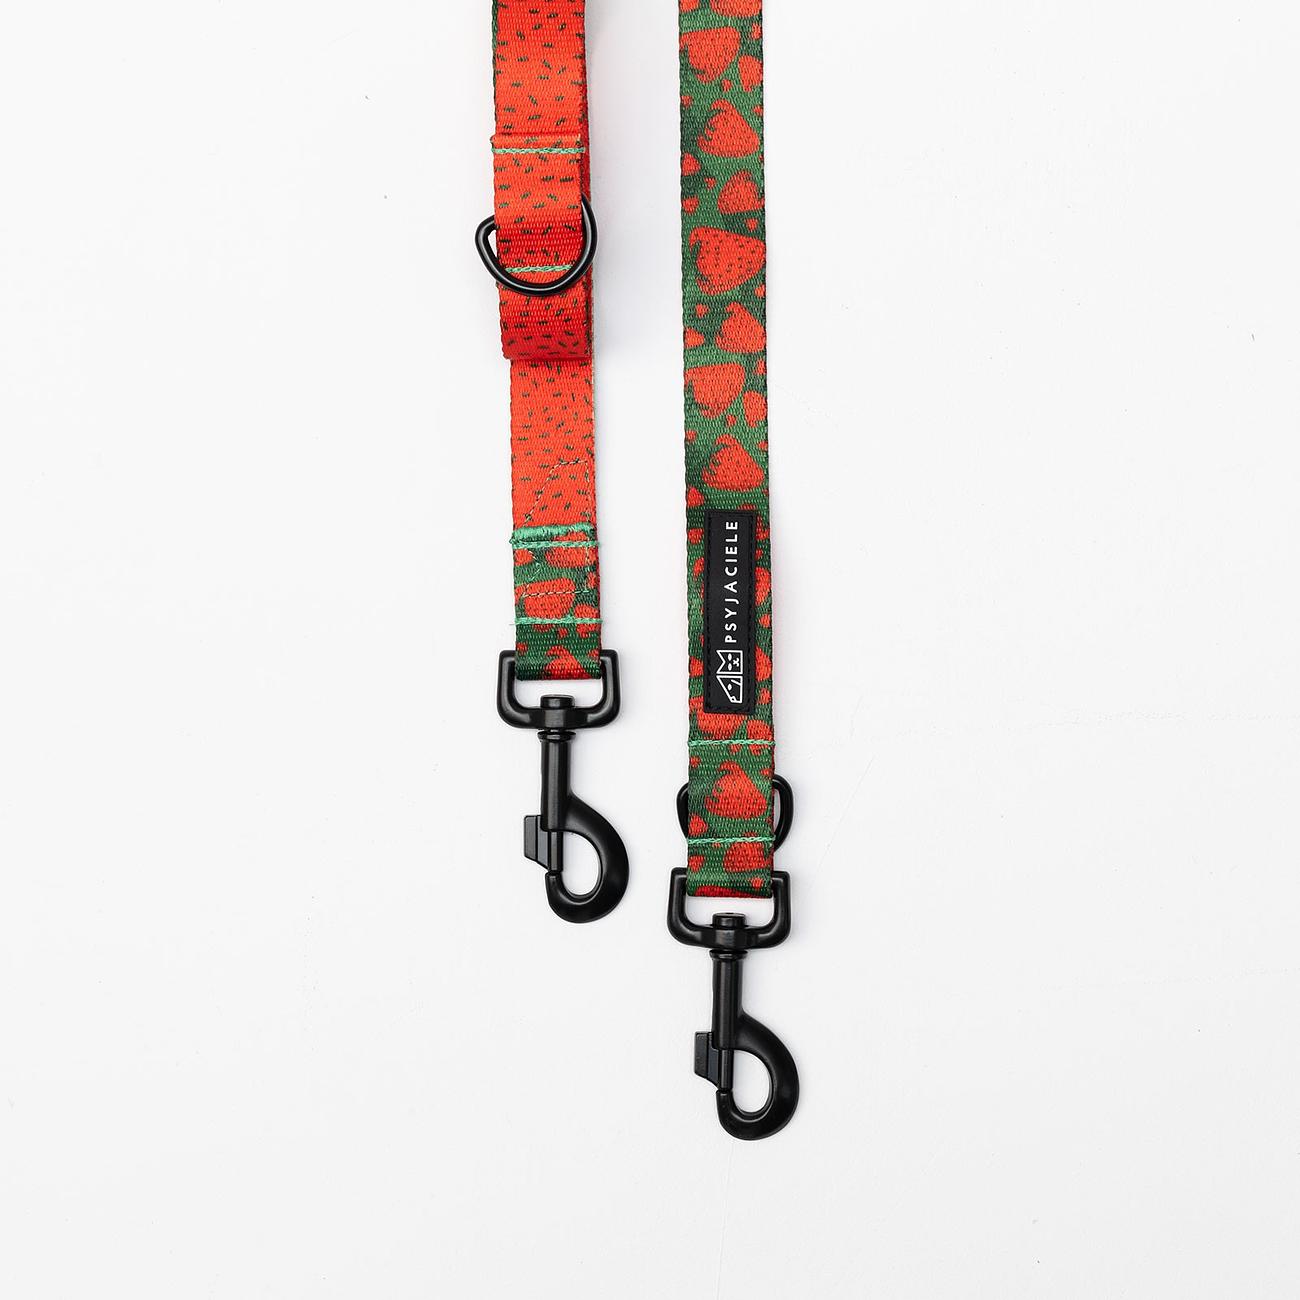 Adjustable leash "Strawberry Fields Forever" 